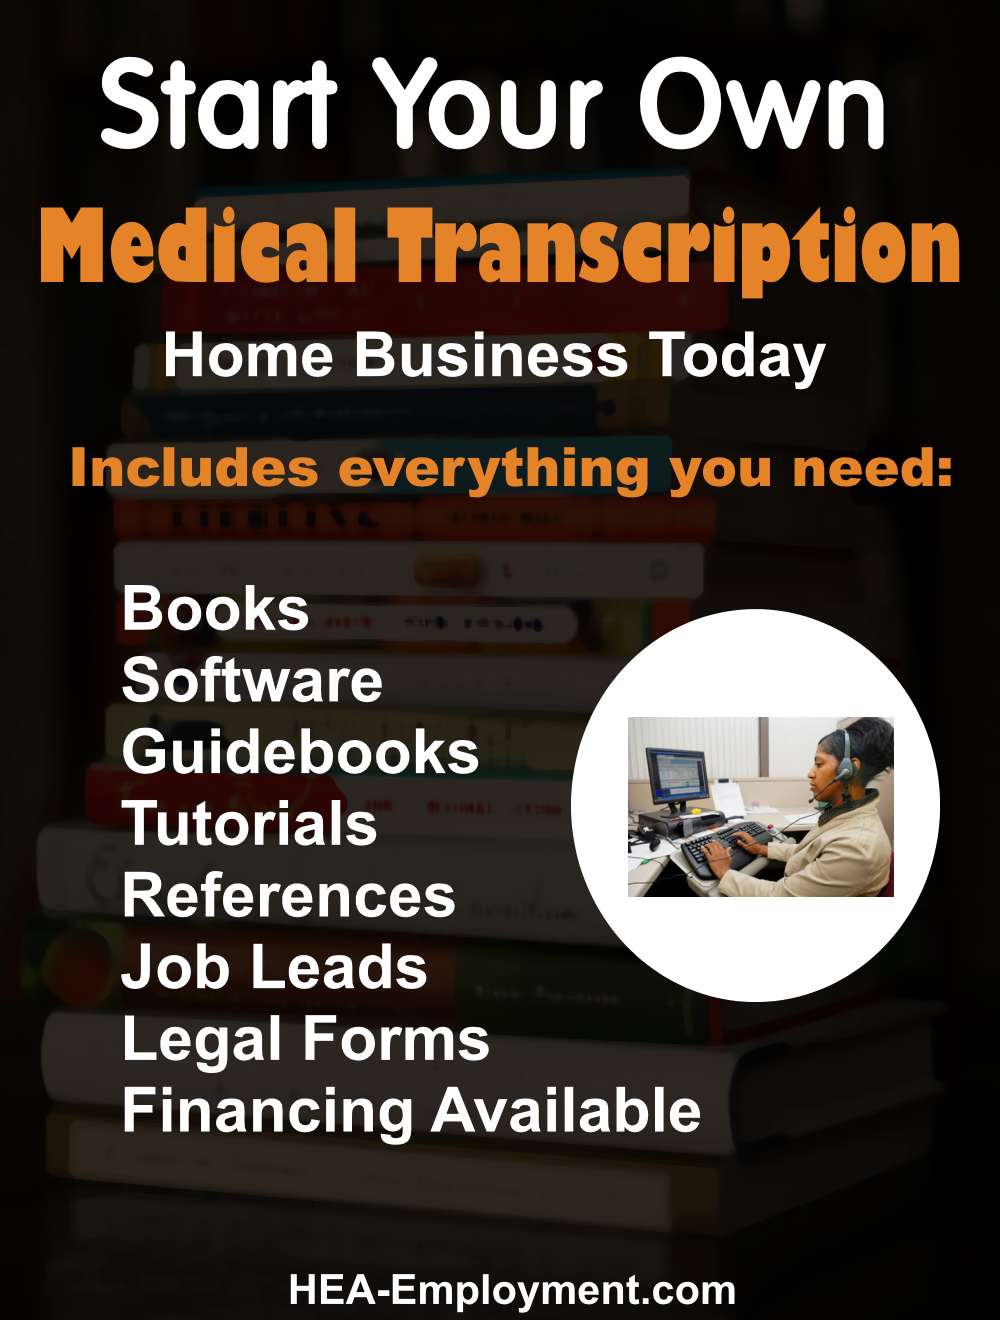 Start your own medical transcription legitimate home based business. Fully equipped home business package with everything you need to get started. Productivity software, tutorials, guidebooks, references, manuals, tax advice and legal forms are included with each kit. Be your own boss!